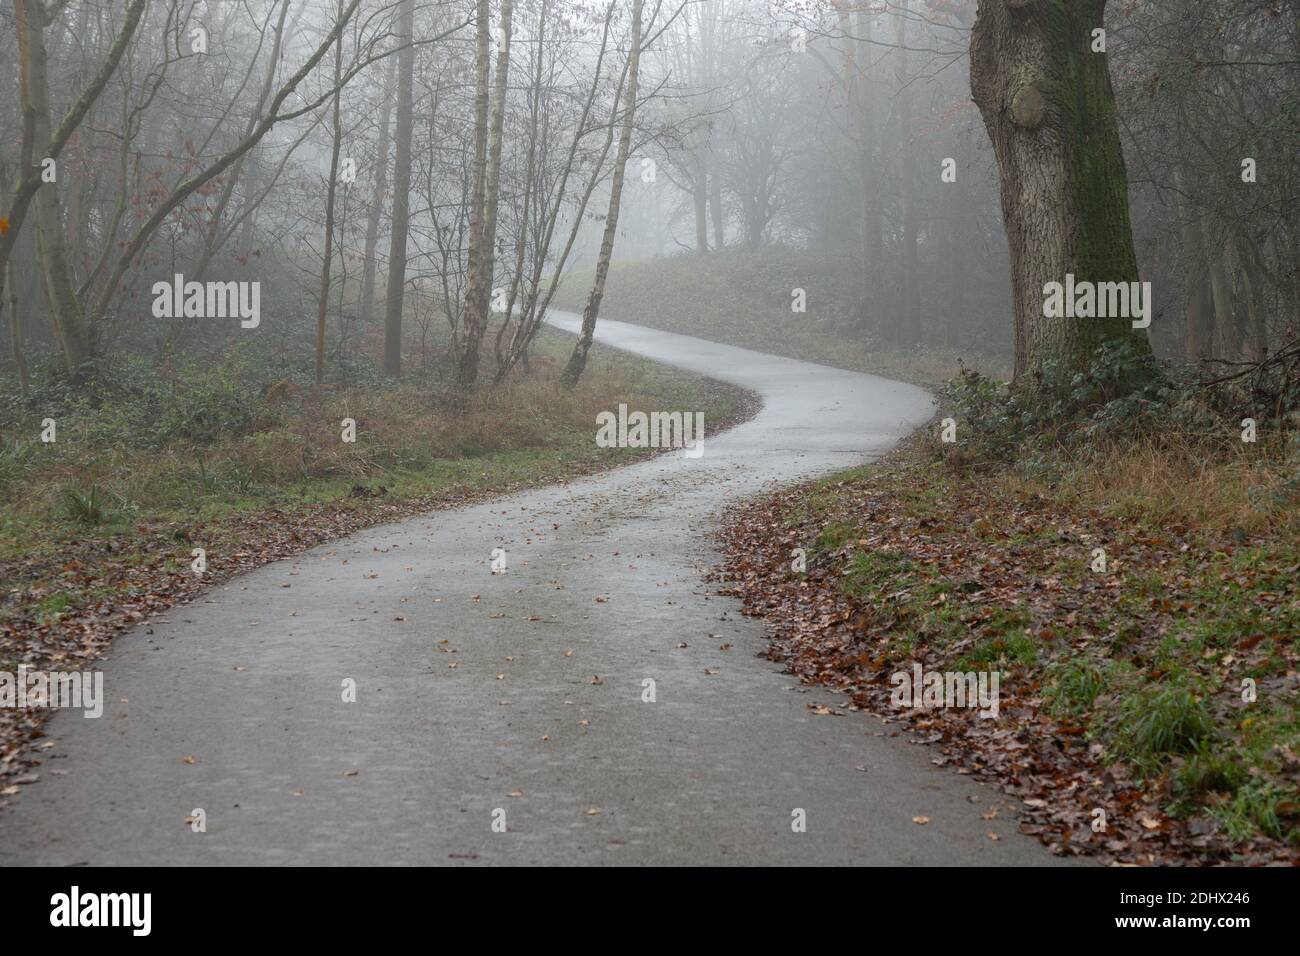 S-bend curved road through mist in forest with ghostly trees in distance feeling lost. High quality photo Stock Photo